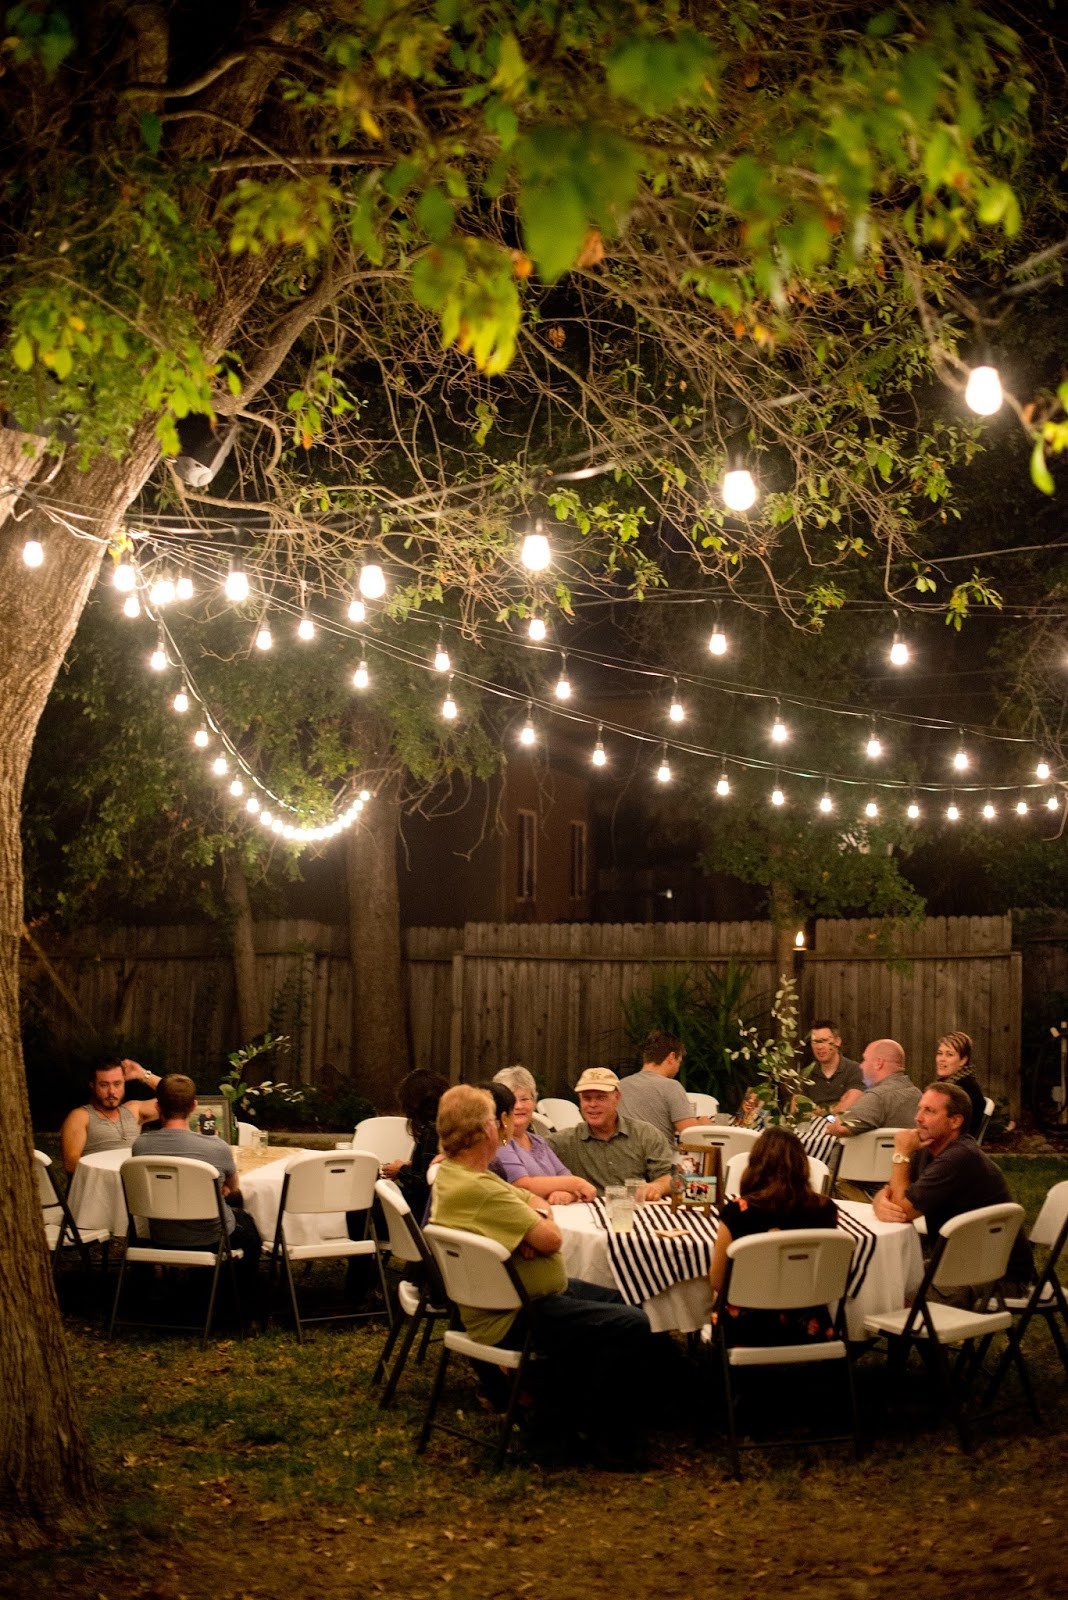 Backyard Party Ideas Adults
 Domestic Fashionista Backyard Birthday Party For the Guy